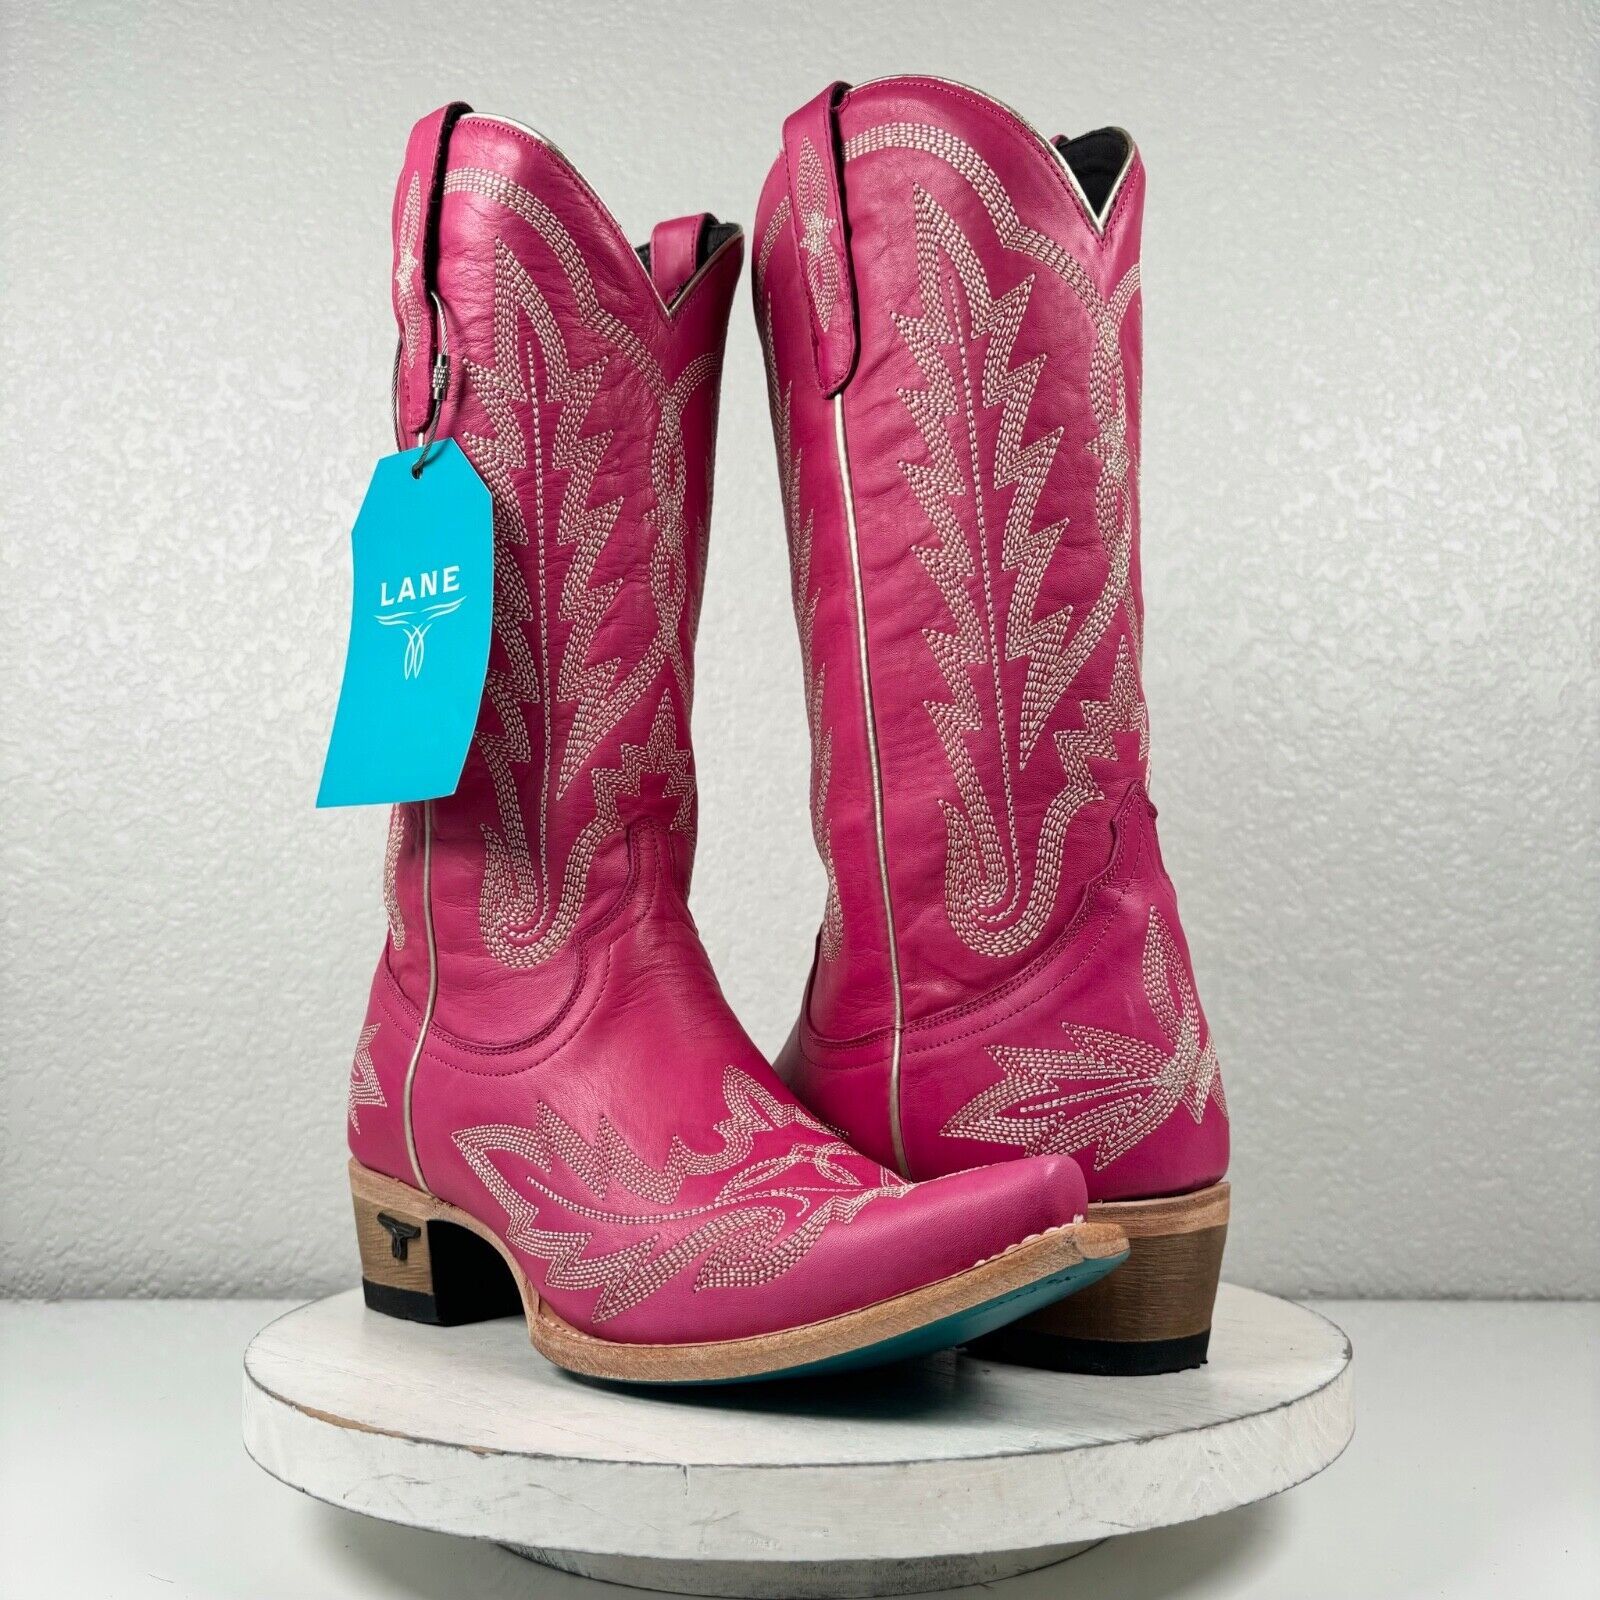 Primary image for NEW Lane LEXINGTON Hot Pink Leather Cowboy Boots Womens Sz 8.5 Western Snip Toe